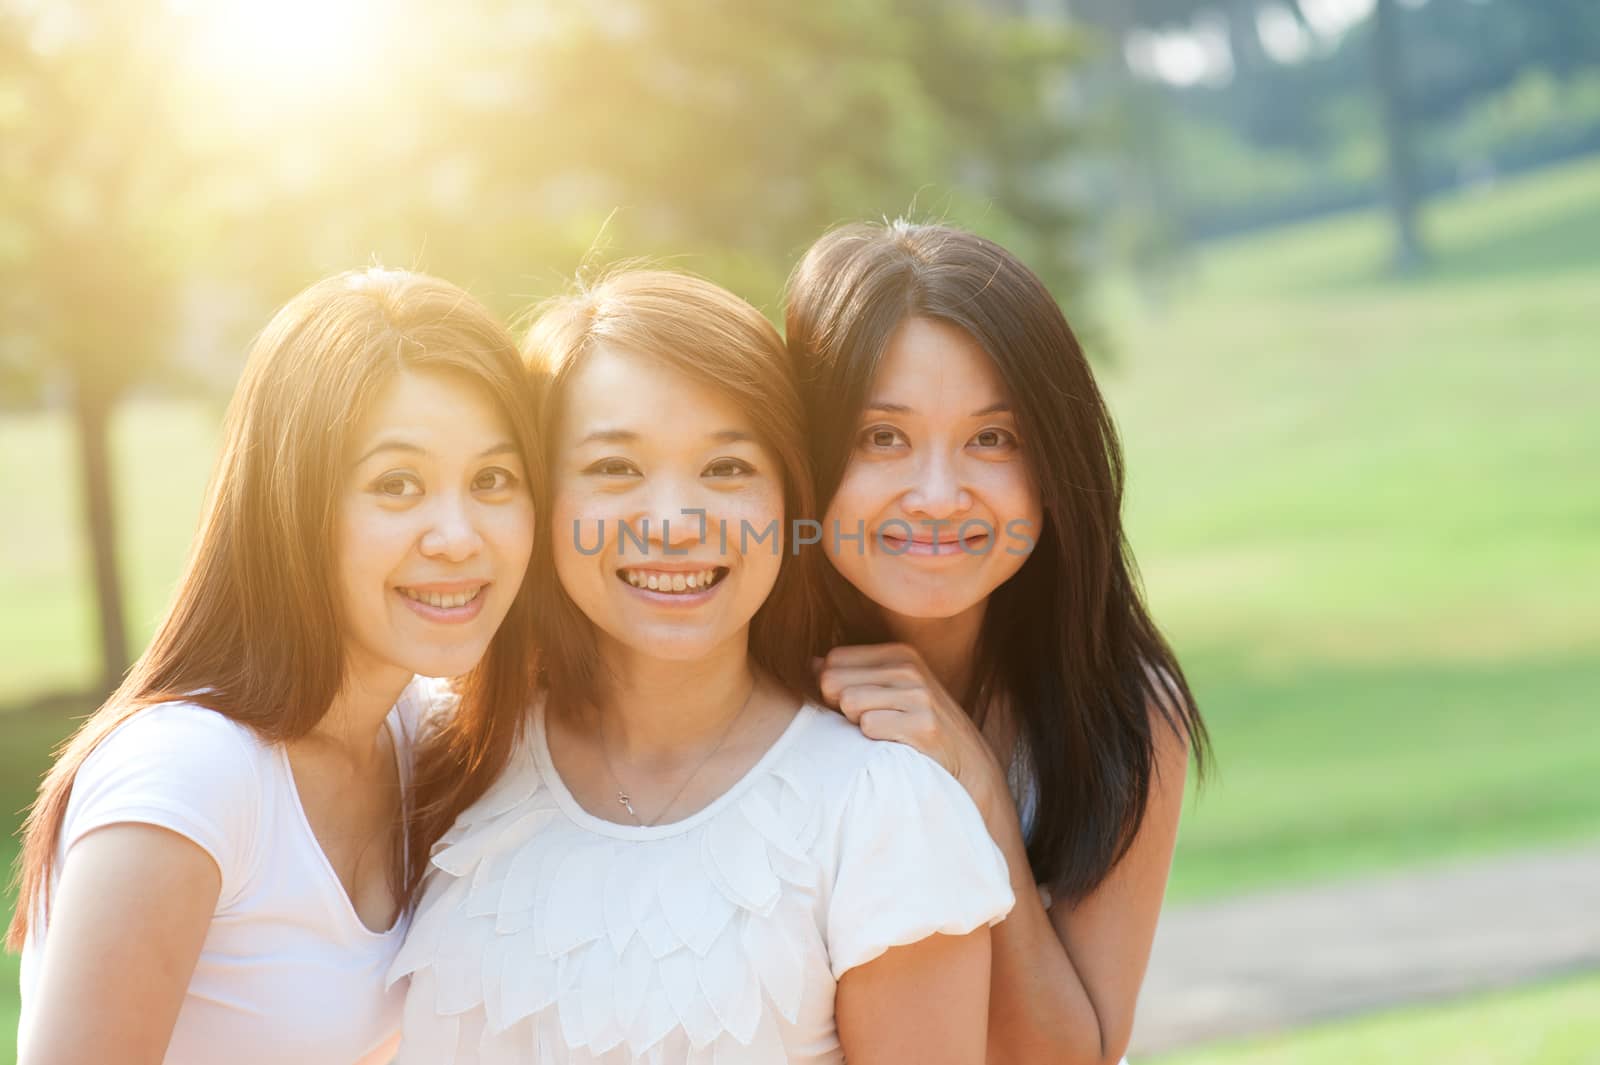 Group of young Asian females having fun at outdoor park, looking at camera smiling happily, sisters or girlfriends, friendship concept, sun flare background.